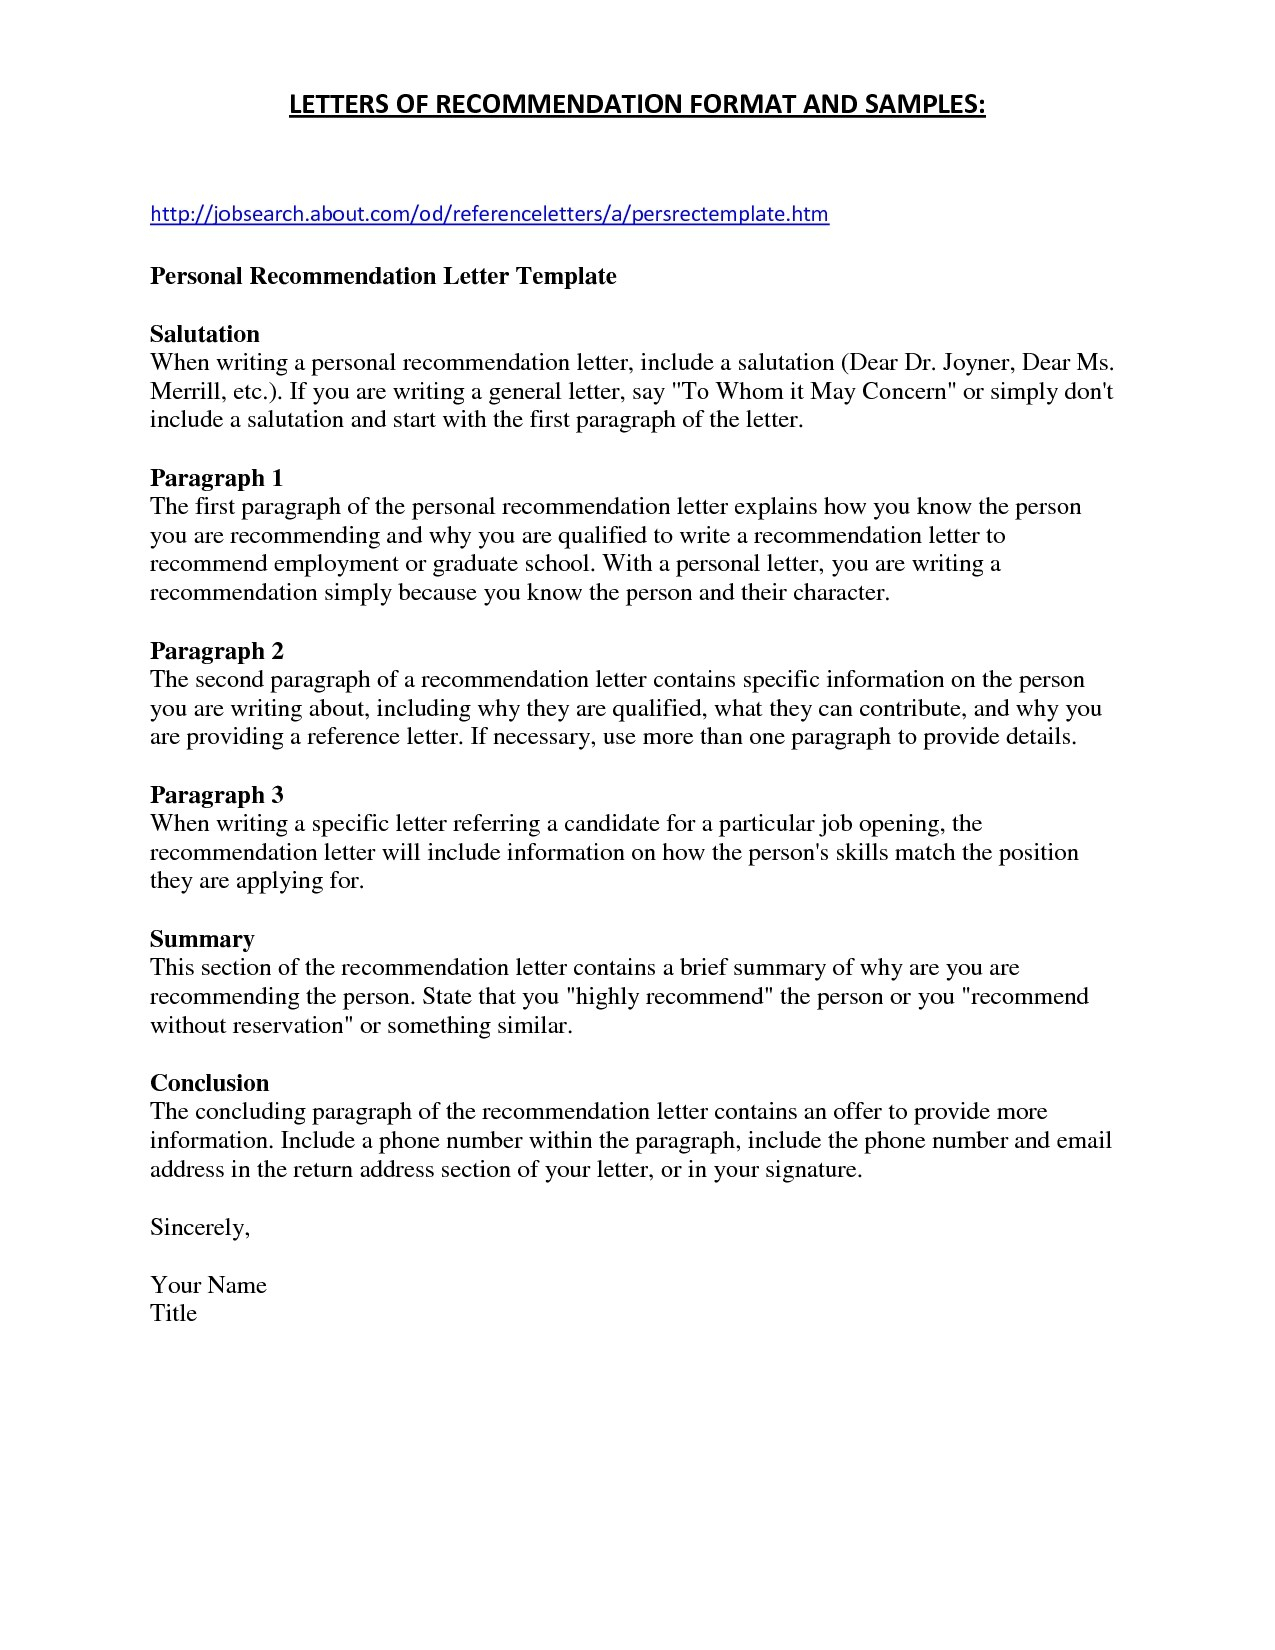 Law School Letter Of Recommendation Template - Law School Letter Re Mendation Unique How to Make A Re